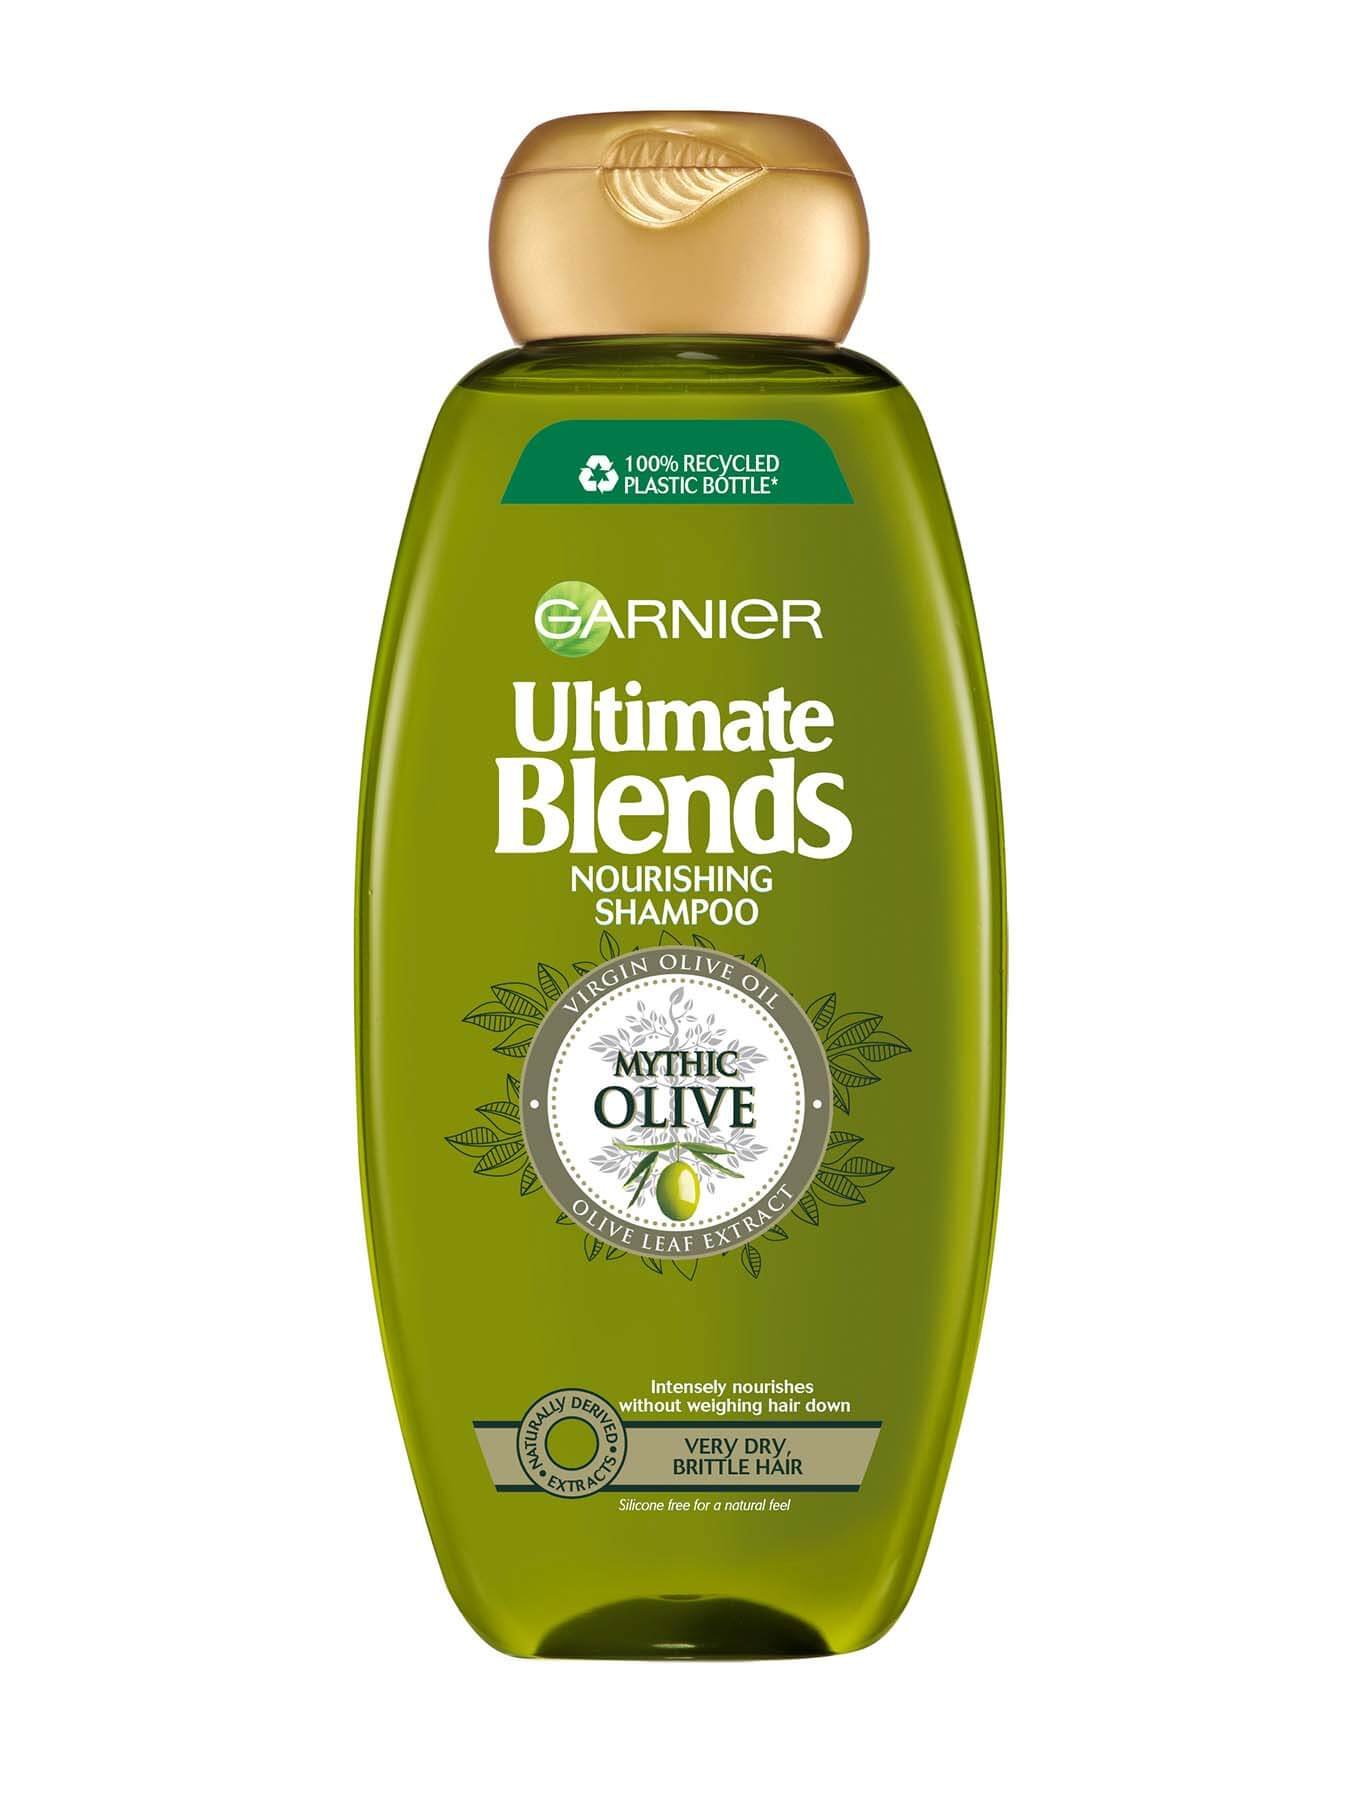 Mythic Olive Shampoo front of pack